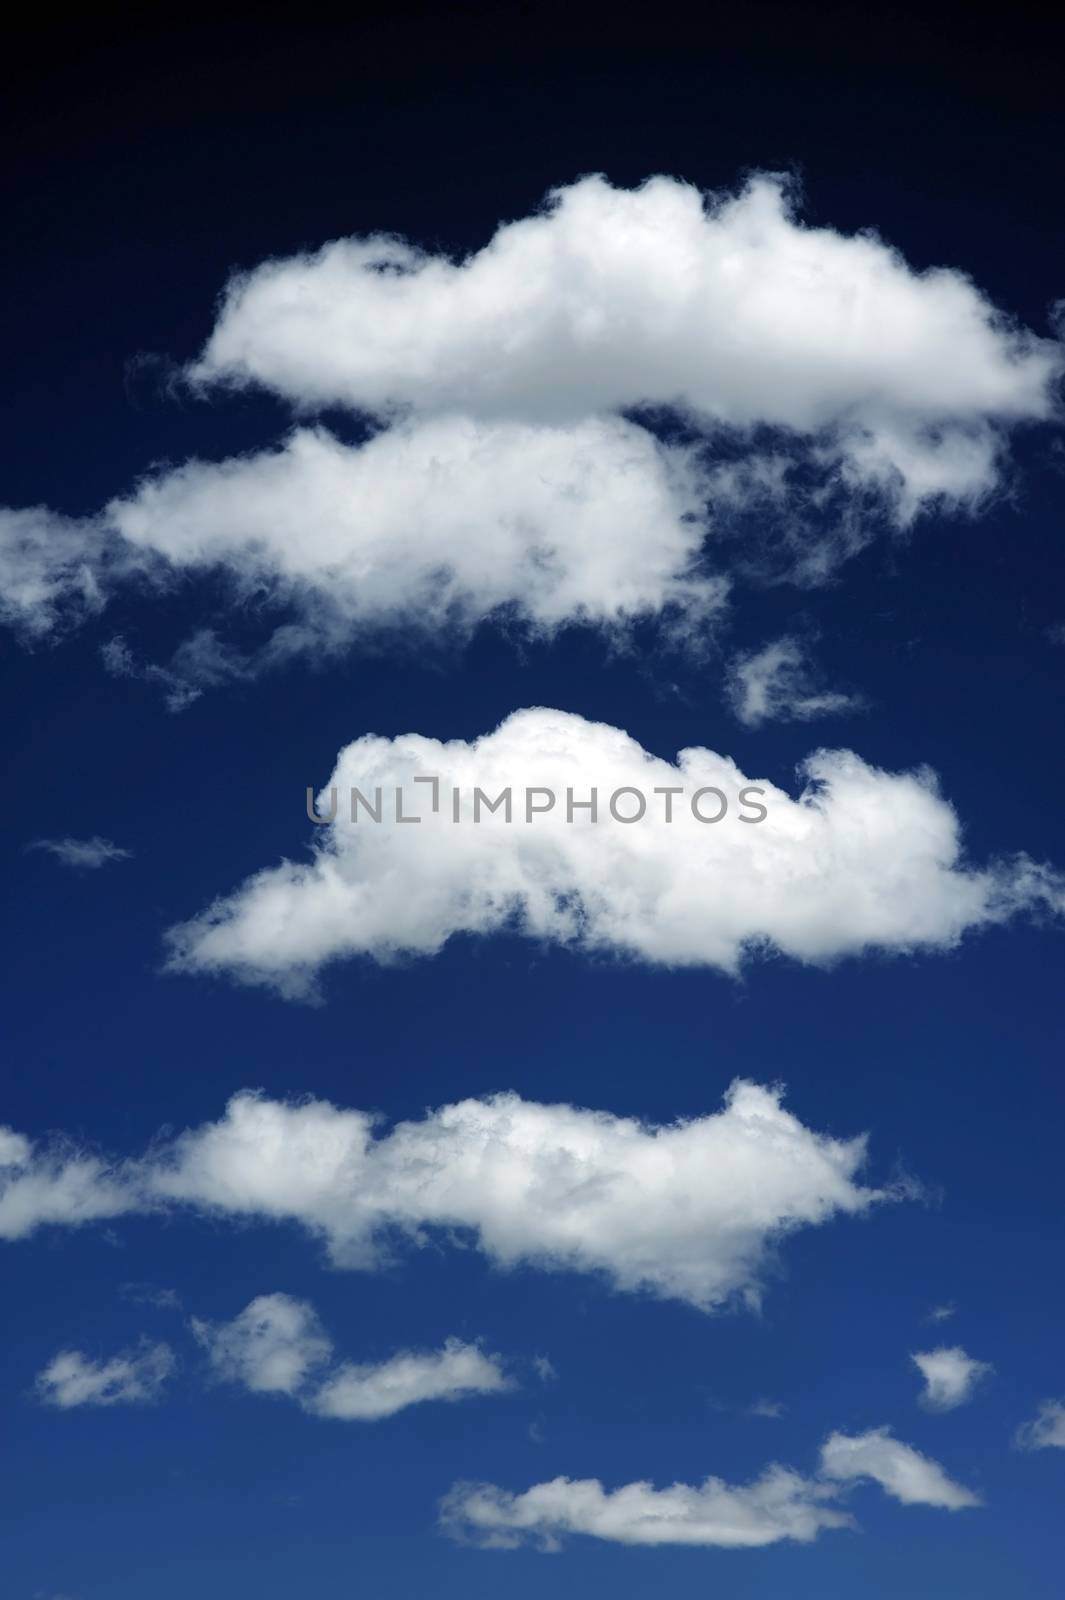 Cloud Layers - Dark Blue Sky with Few Clouds on Top of Each Other. Vertical Photography